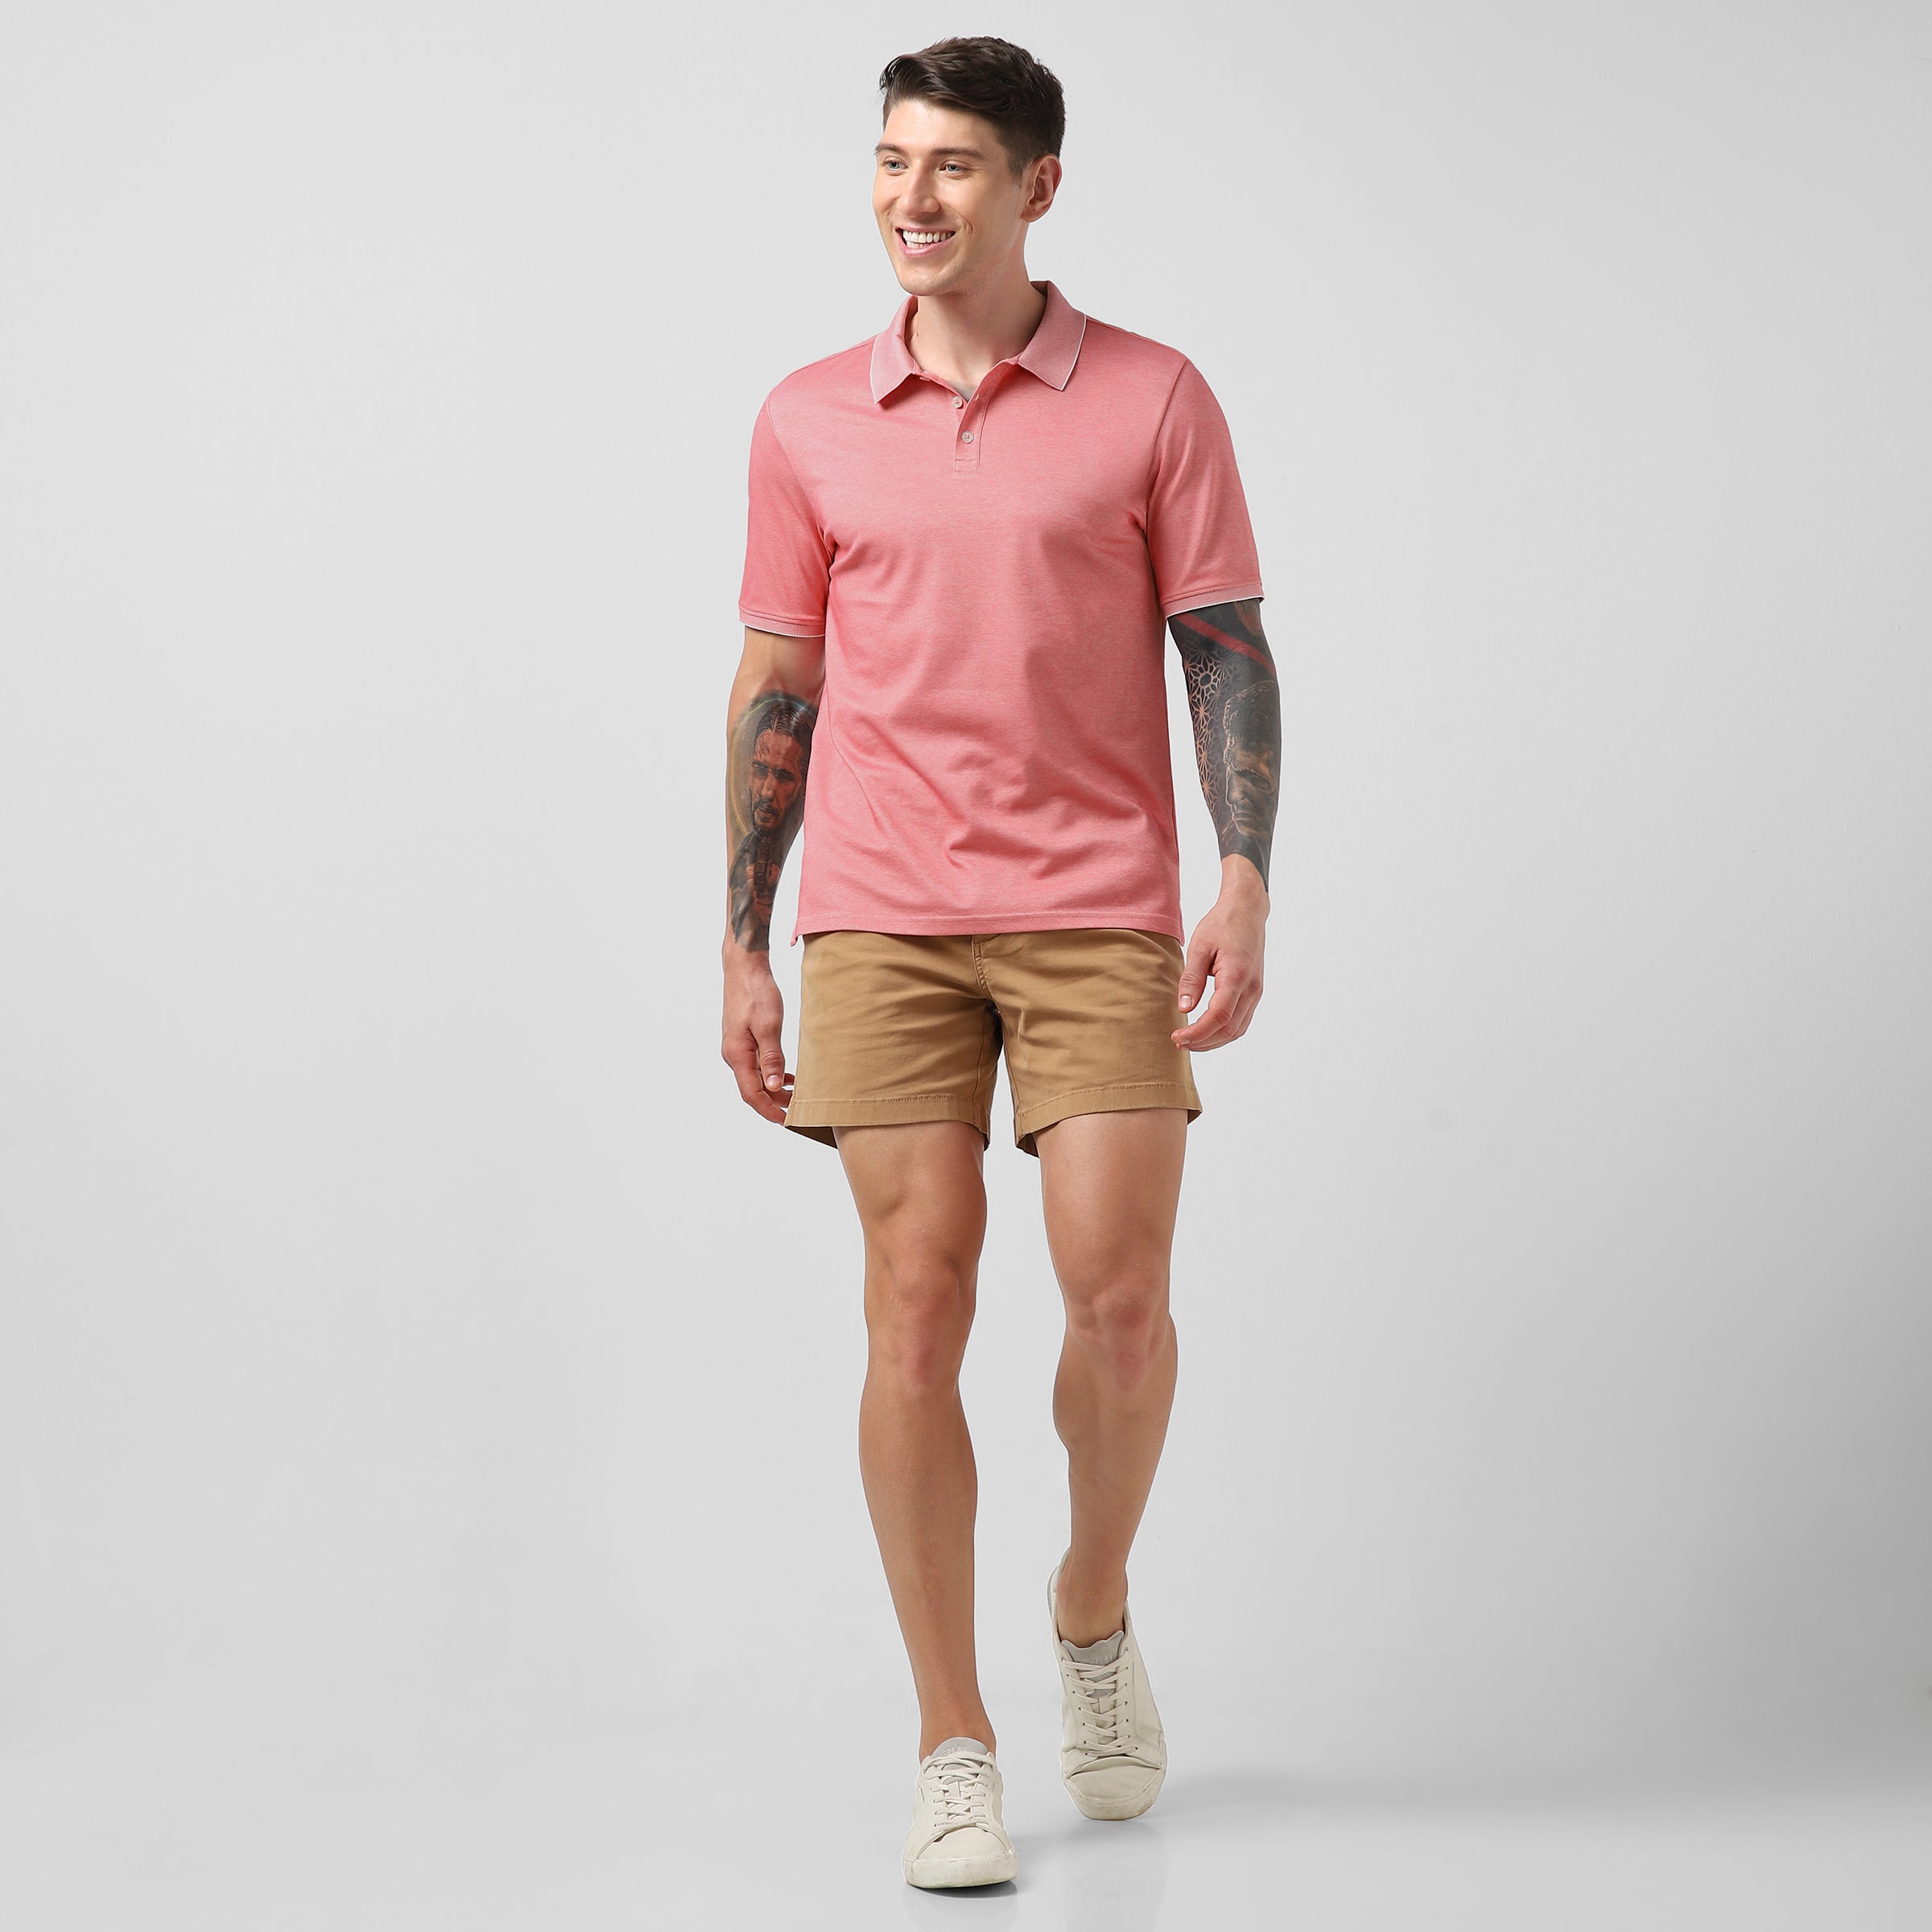 Range Polo Coral full body on model wearing Stretch Shorts Camel